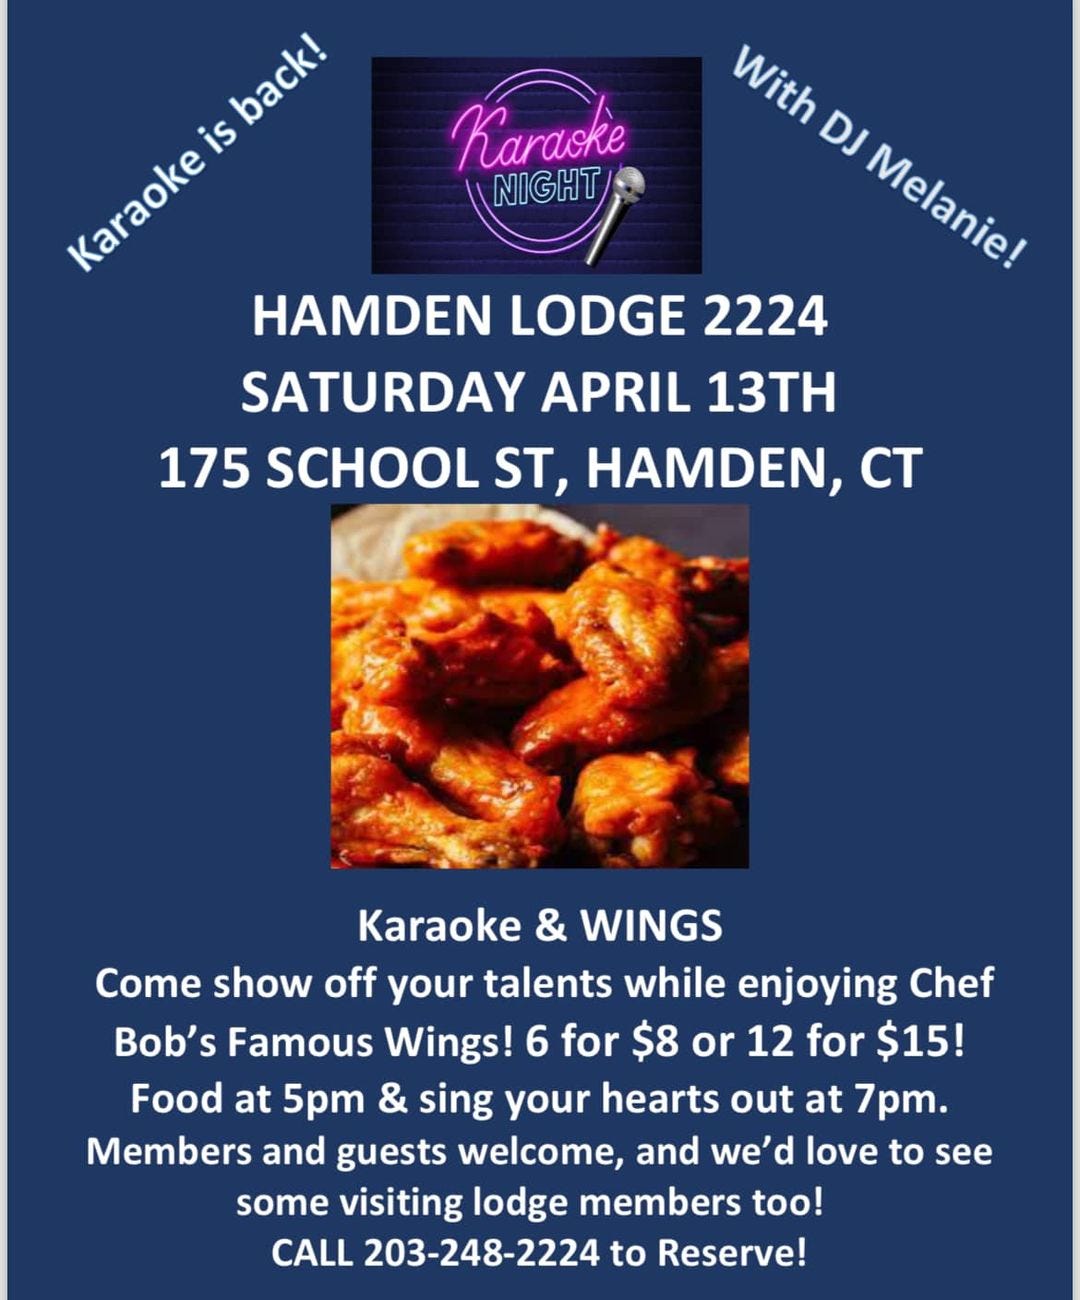 May be an image of text that says 'Karaoke NIGHT back! With Karaoke Karaoke is DJ Melaniel HAMDEN LODGE 2224 SATURDAY APRIL 13TH 175 SCHOOL ST, HAMDEN, CT Karaoke & WINGS Come show off your talents while enjoying Chef Bob's Famous Wings! 6 for $8 or 12 for $15! Food at 5pm & sing your hearts out at 7pm. Members and guests welcome, and we' love to see some visiting lodge members too! CALL 203-248-2224 to Reserve!'